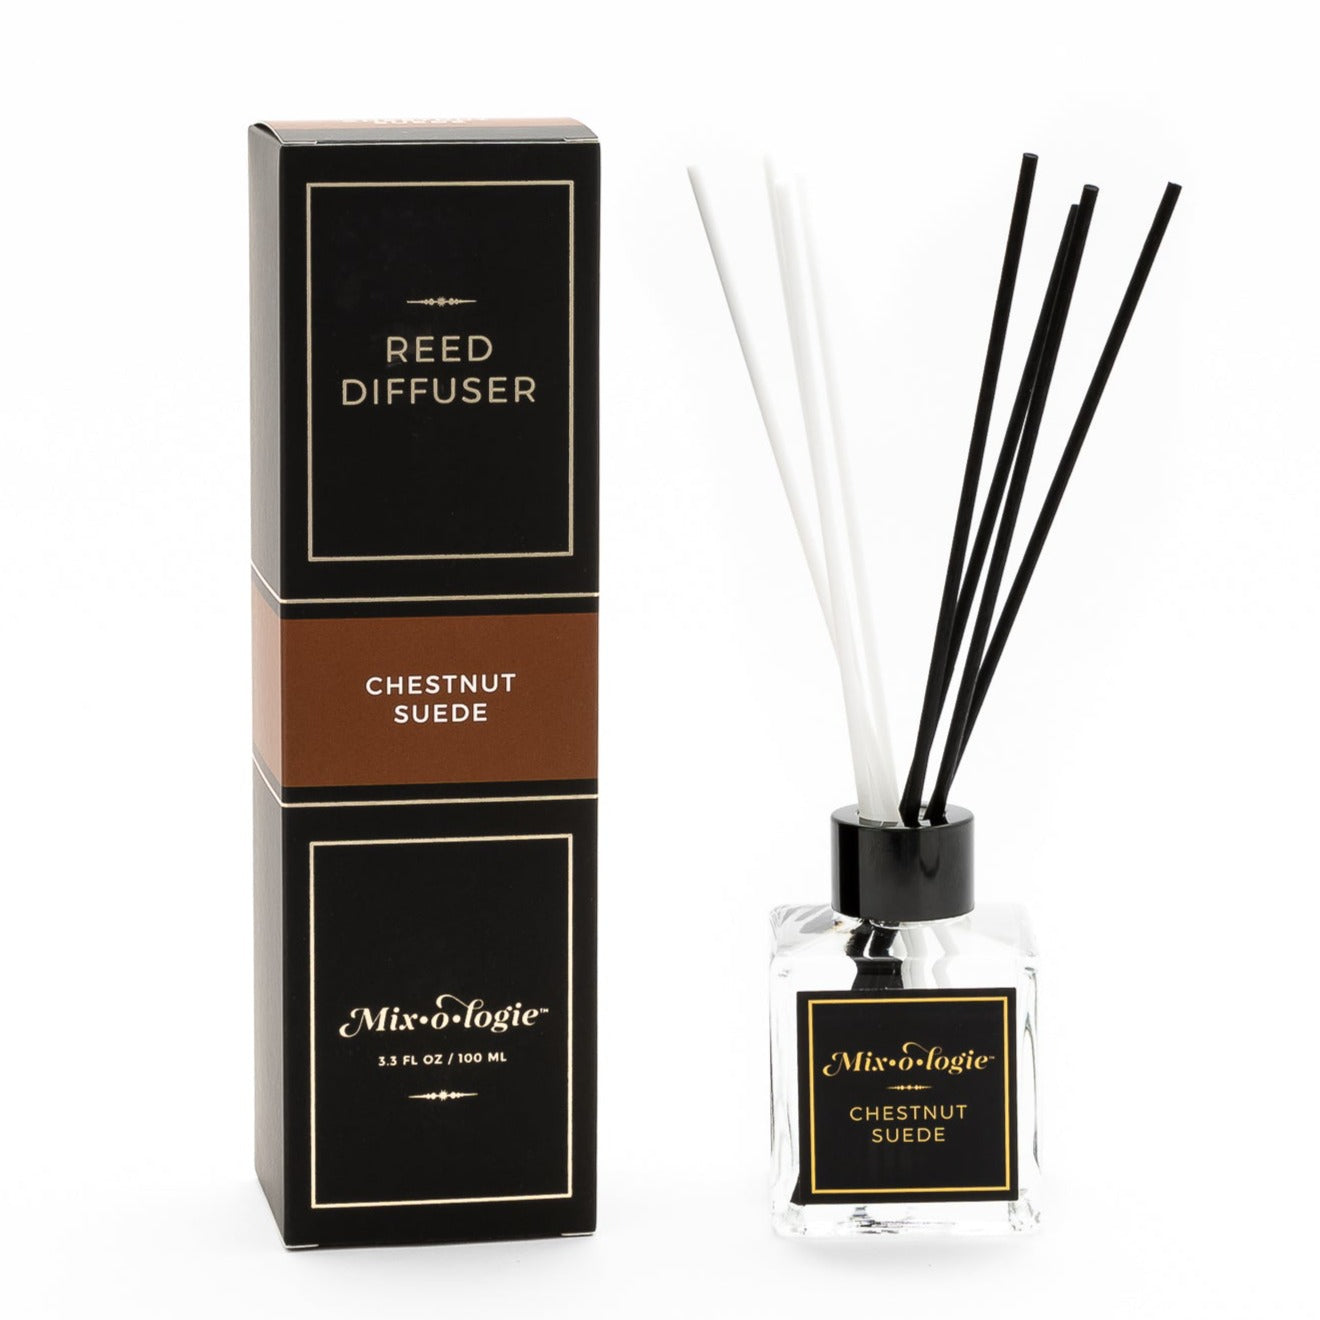 Scented reed diffuser samples